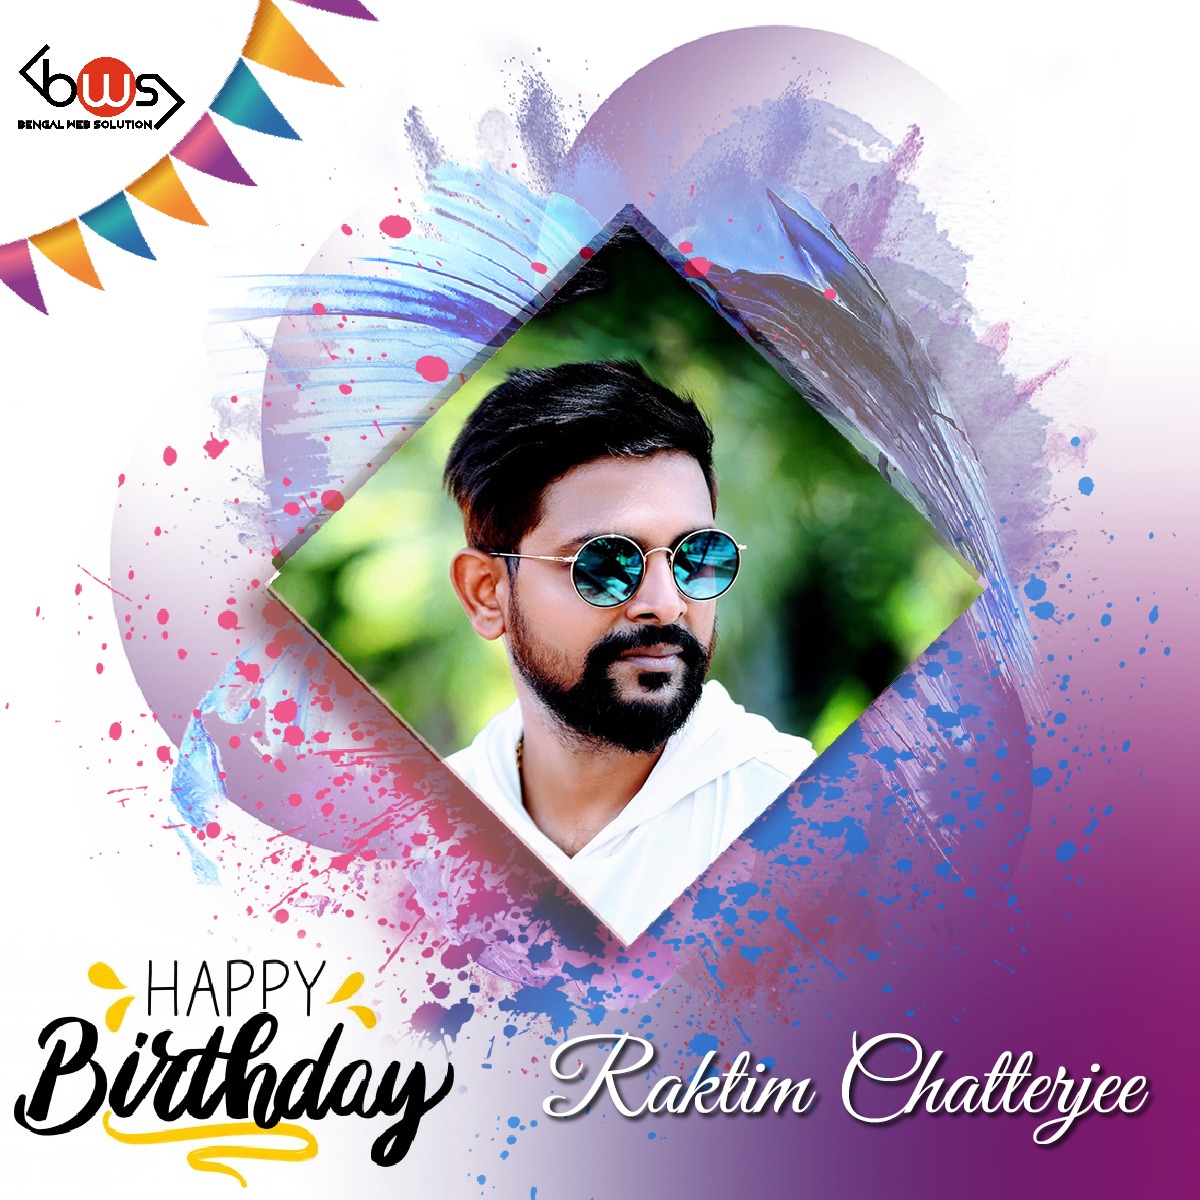 Happy birthday Raktim Chatterjee! May your dreams find wings and may all your opportunities blossom through your hard work and efforts. We hold all our memories close to our heart and look forward to make more in the future

#happybirthday #birthday #wish #RaktimChatterjee